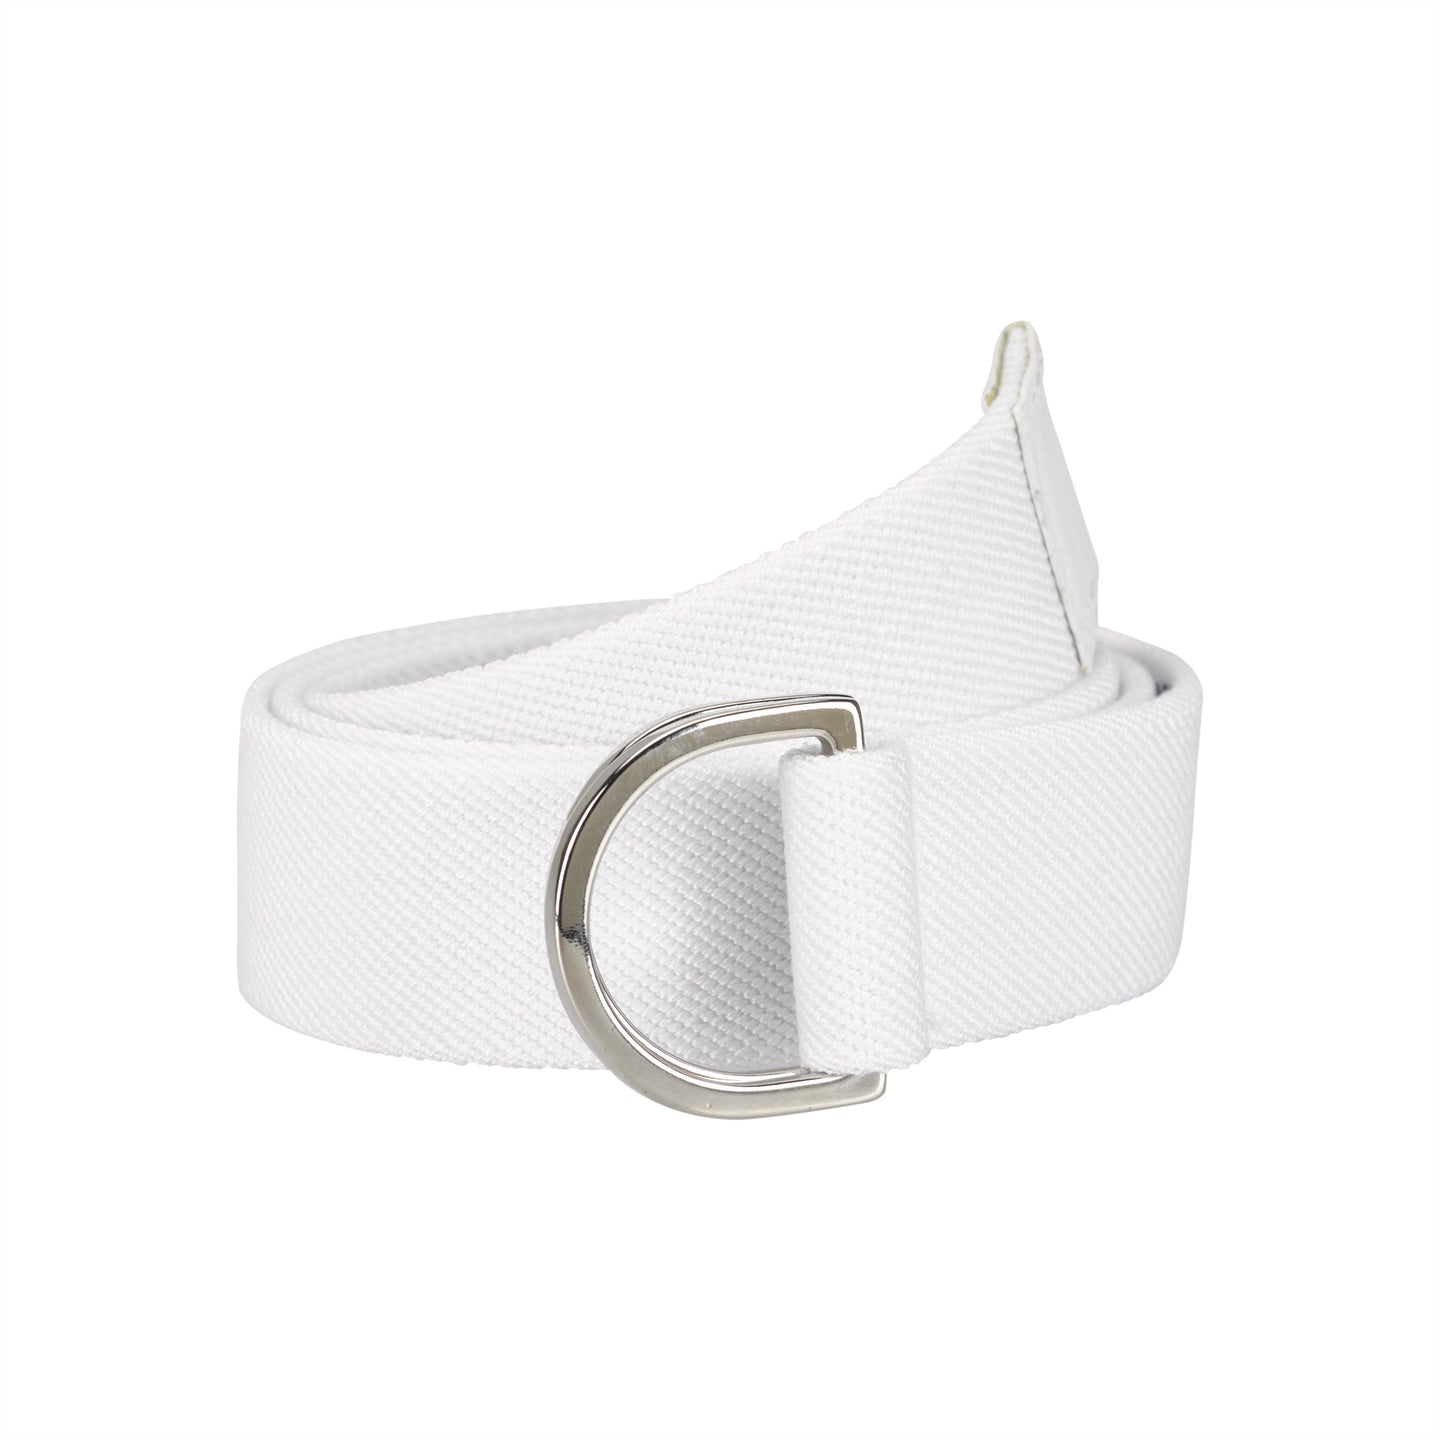 The White Solid Belt